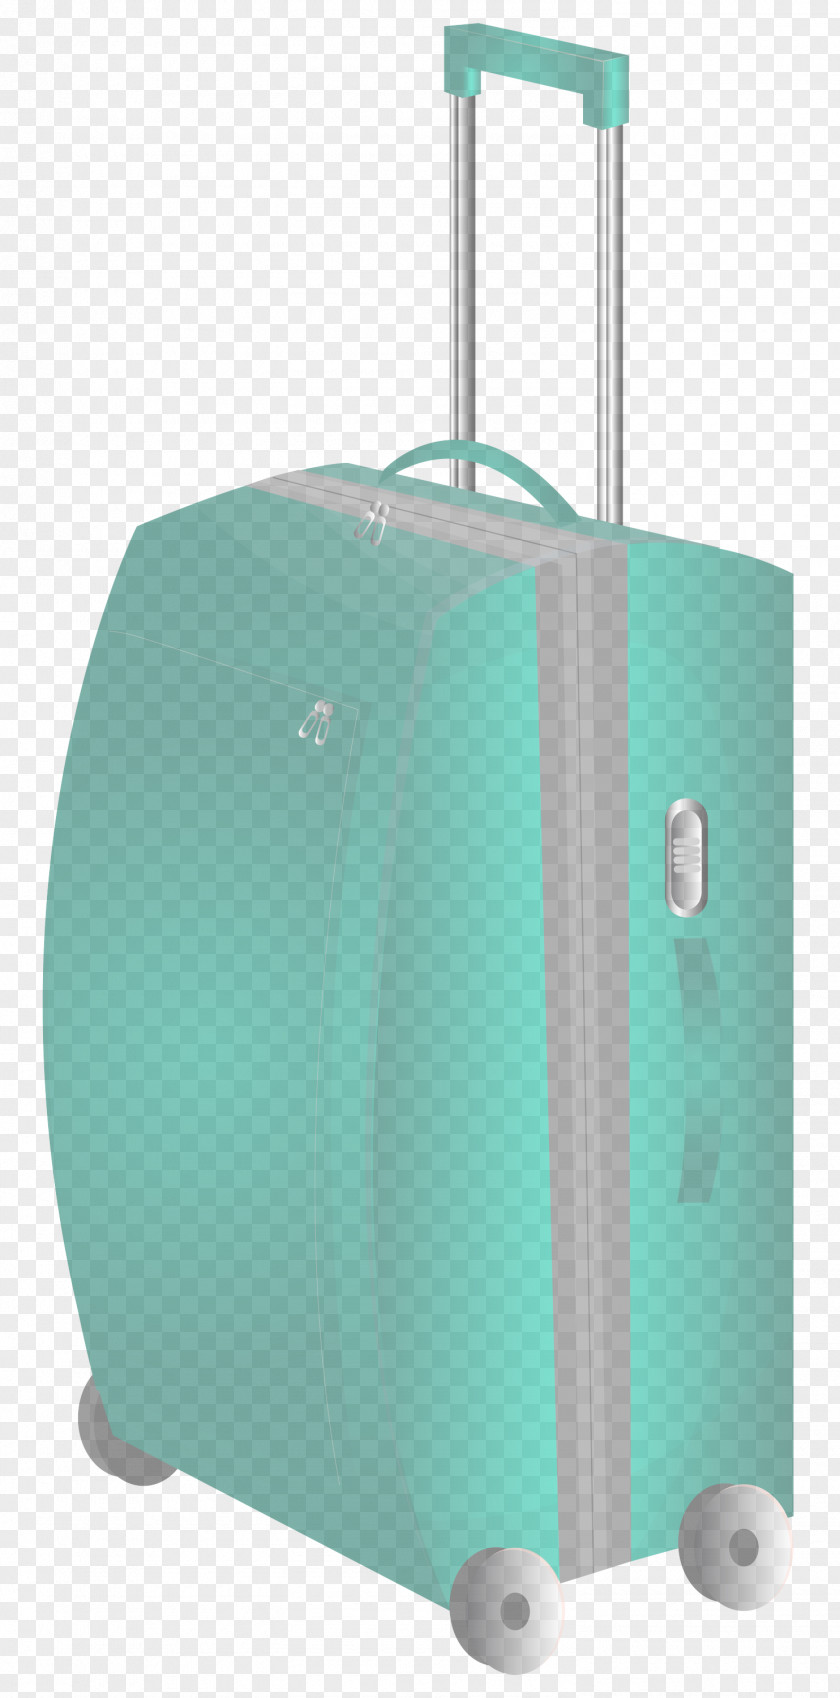 Suitcase Hand Luggage Aqua Turquoise Green PNG